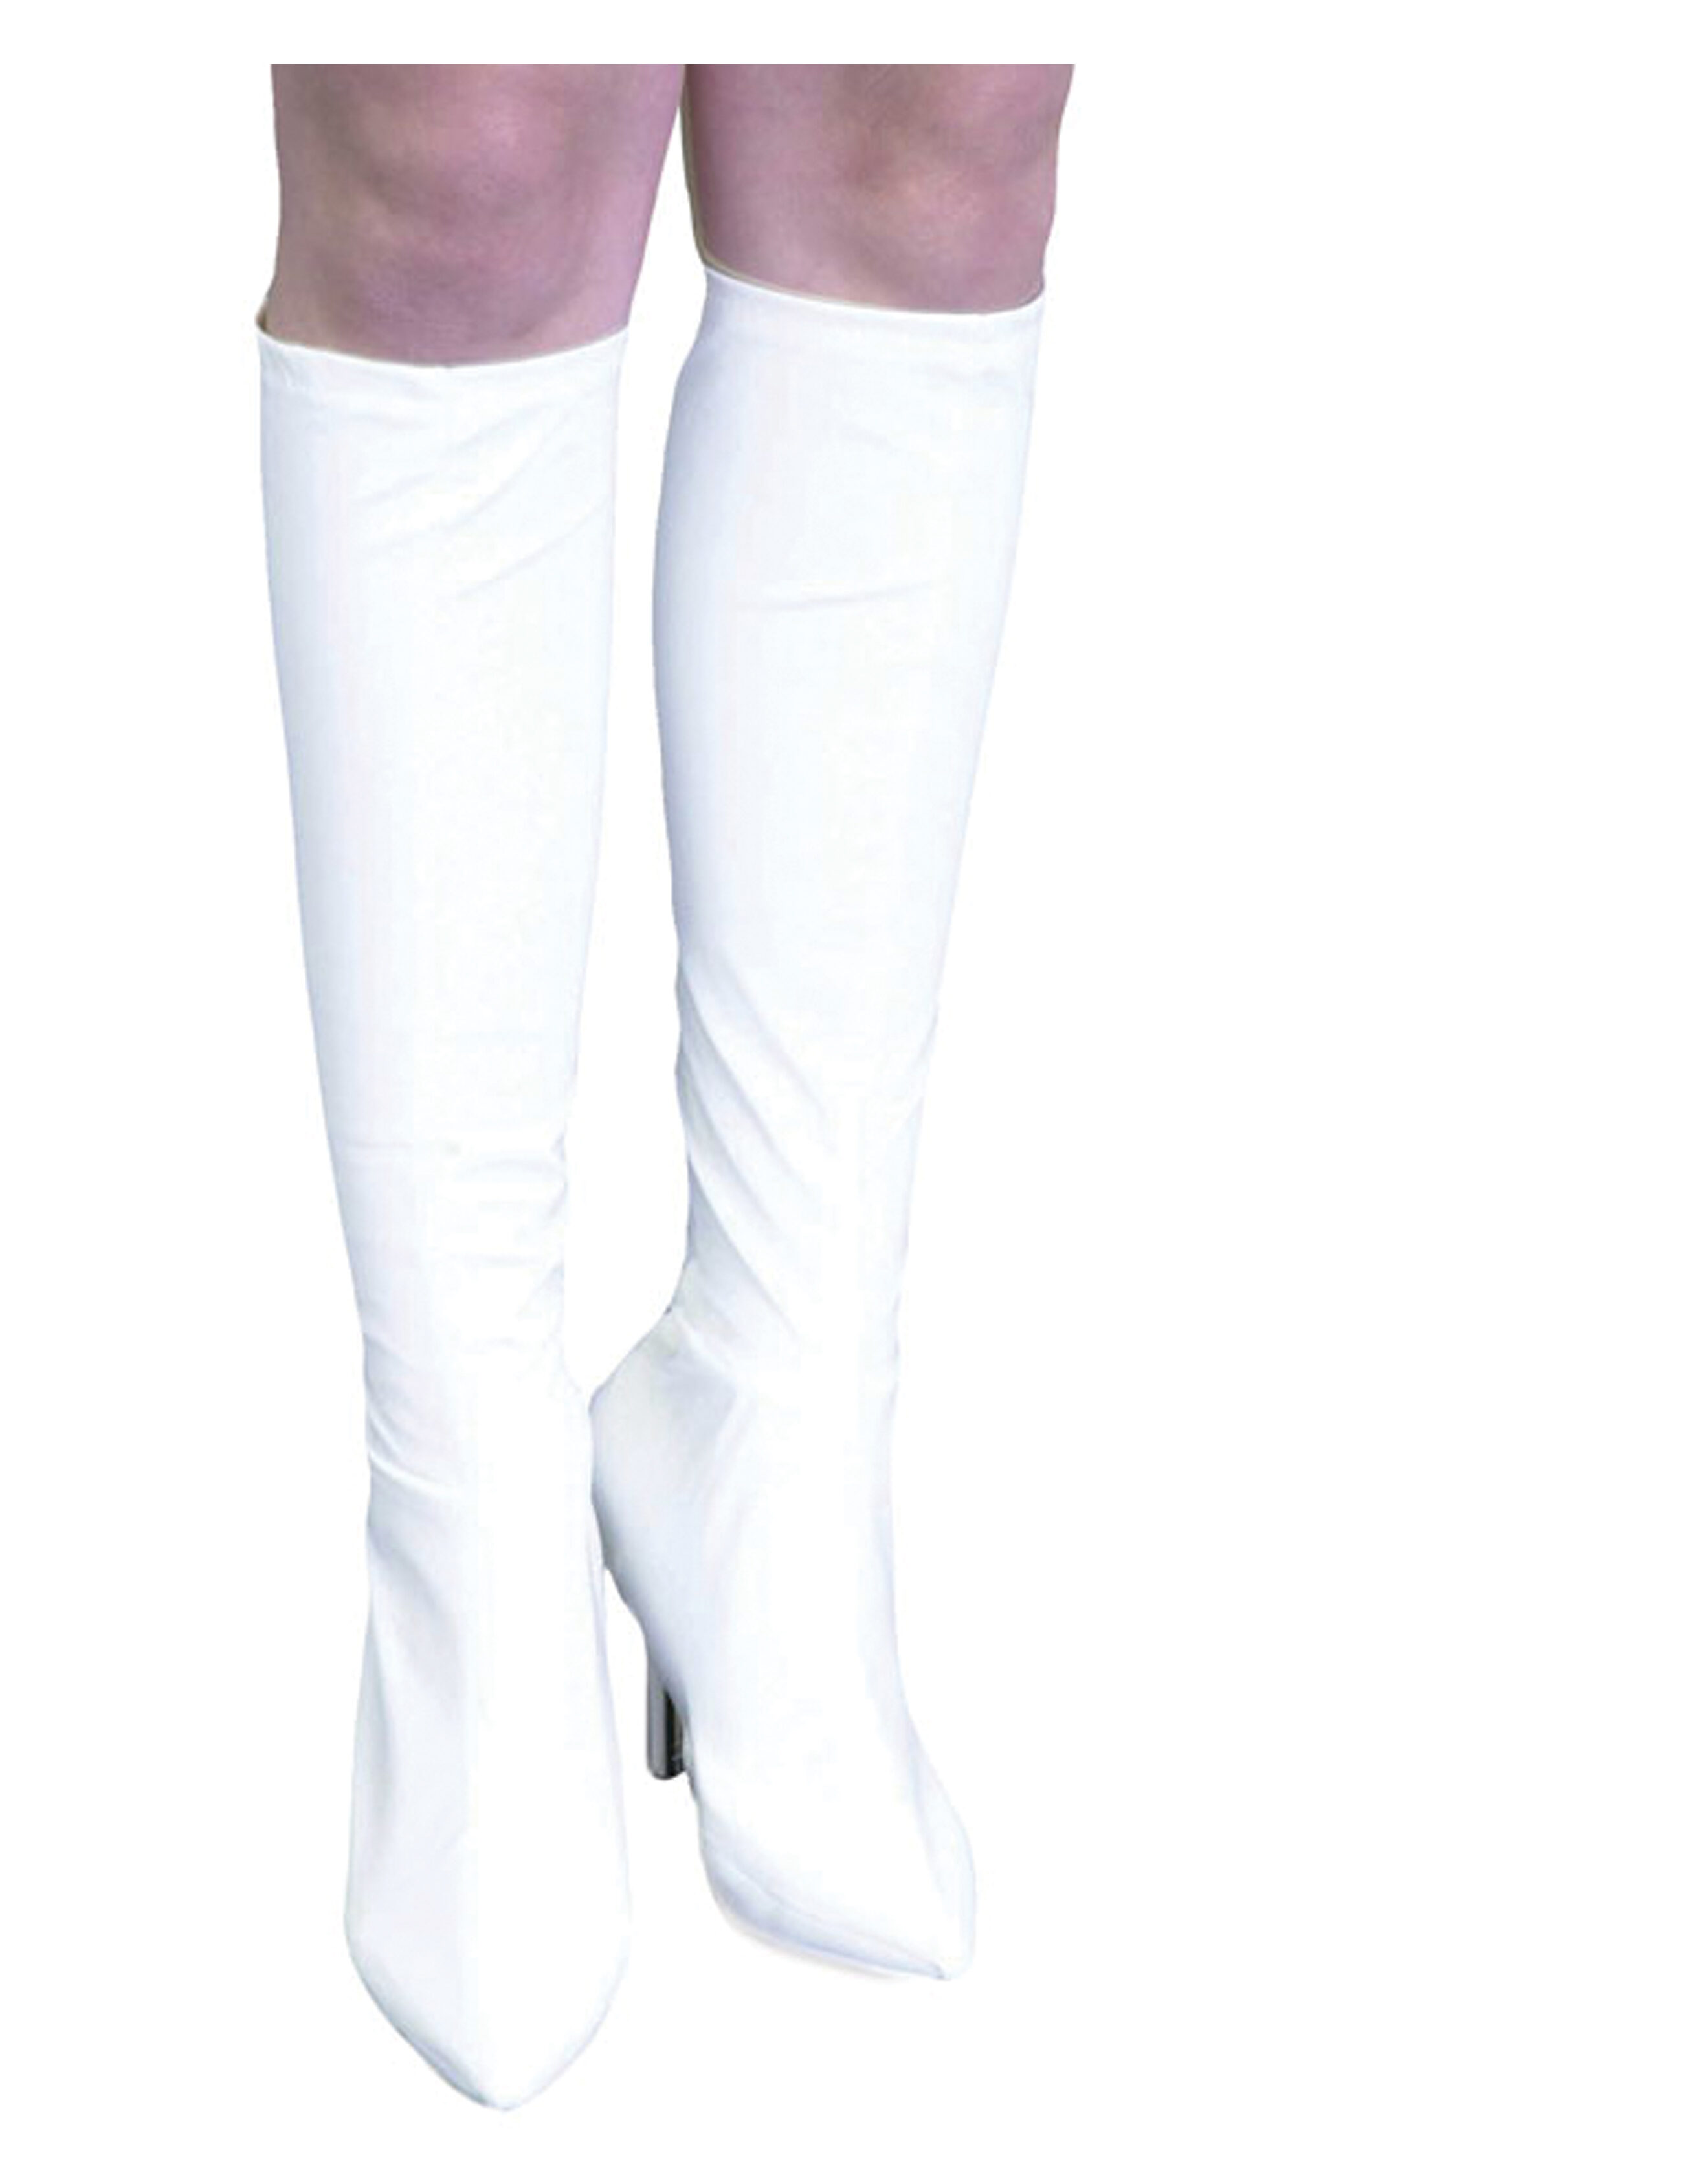 knee high boot covers